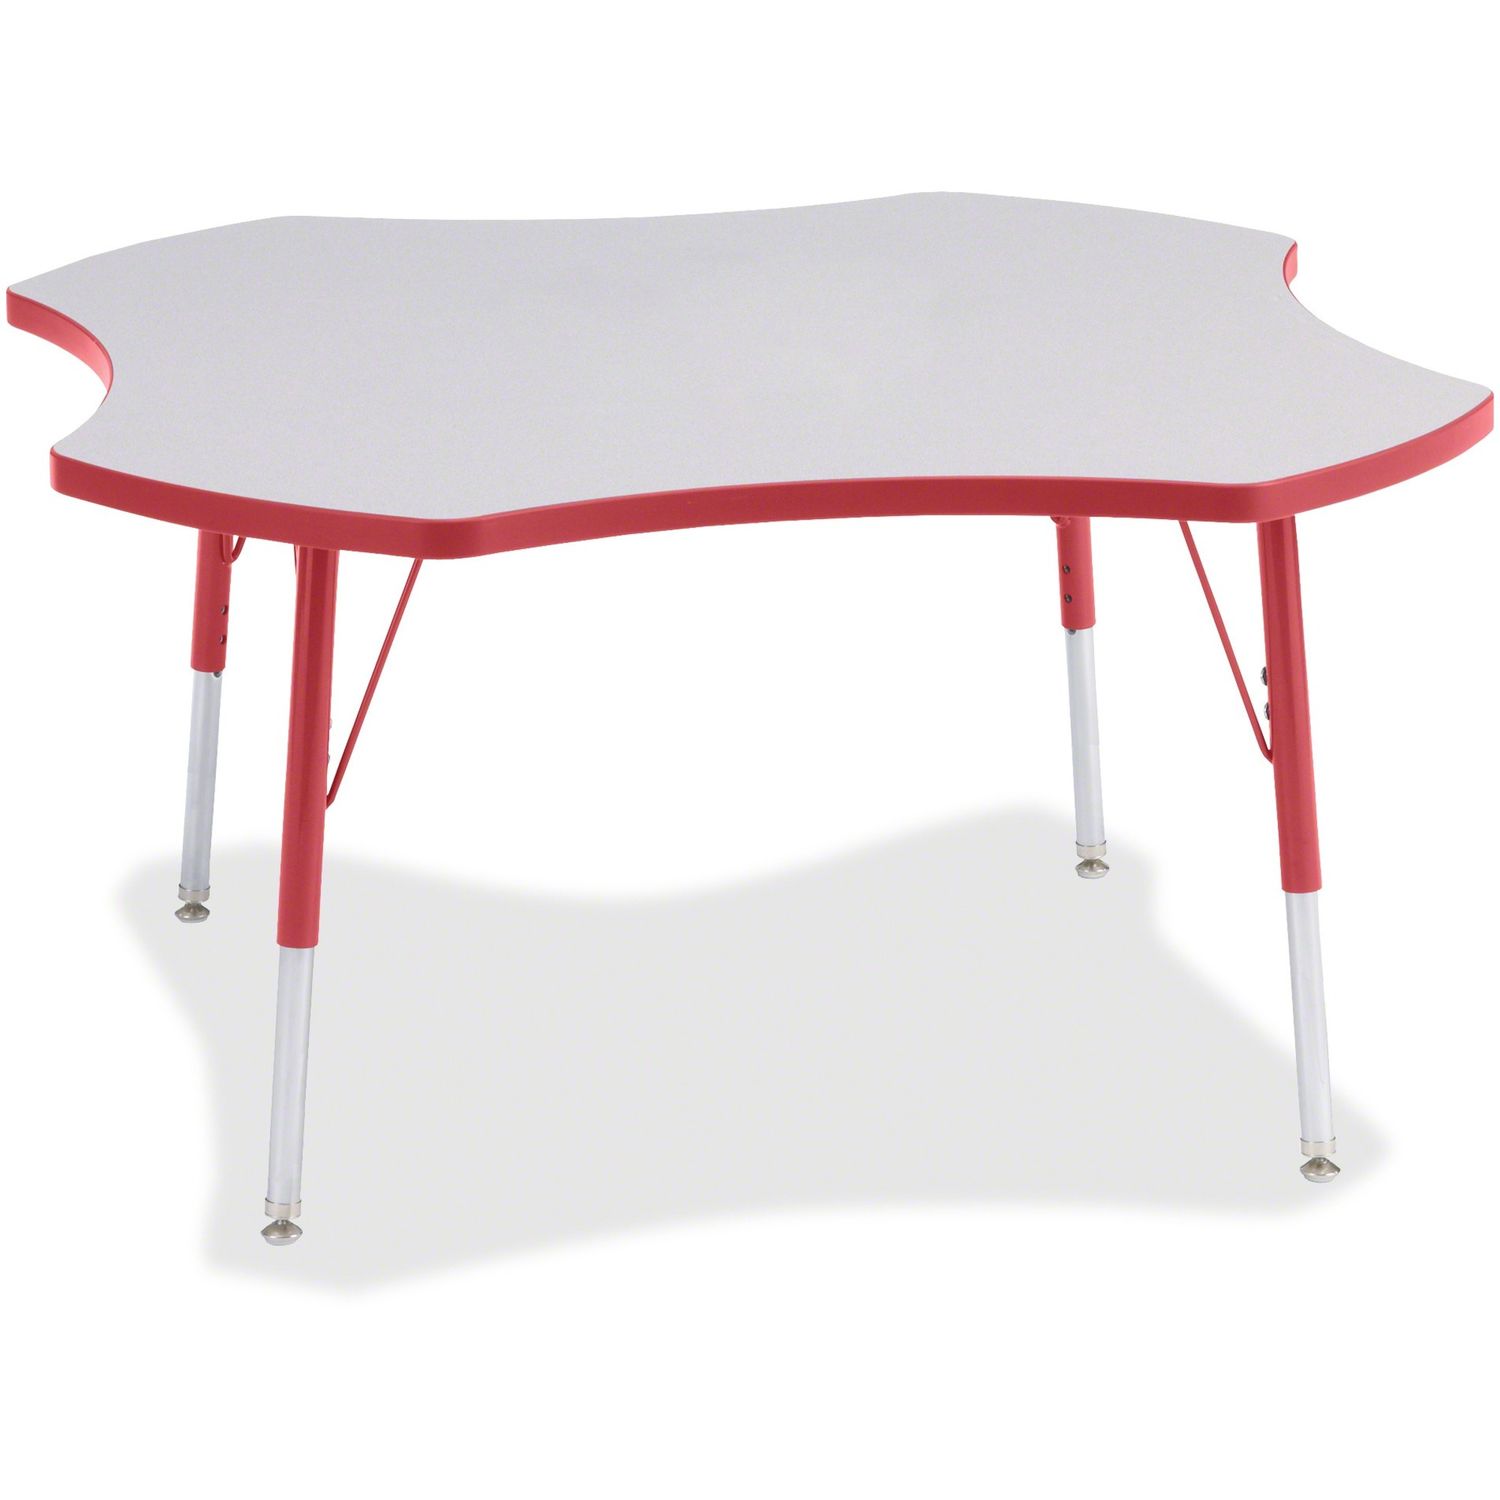 Berries Prism Four-Leaf Student Table Laminated, Red Top, Four Leg Base, 4 Legs, 1.13" Table Top Thickness x 48" Table Top Diameter, 31" Height, Assembly Required, Powder Coated